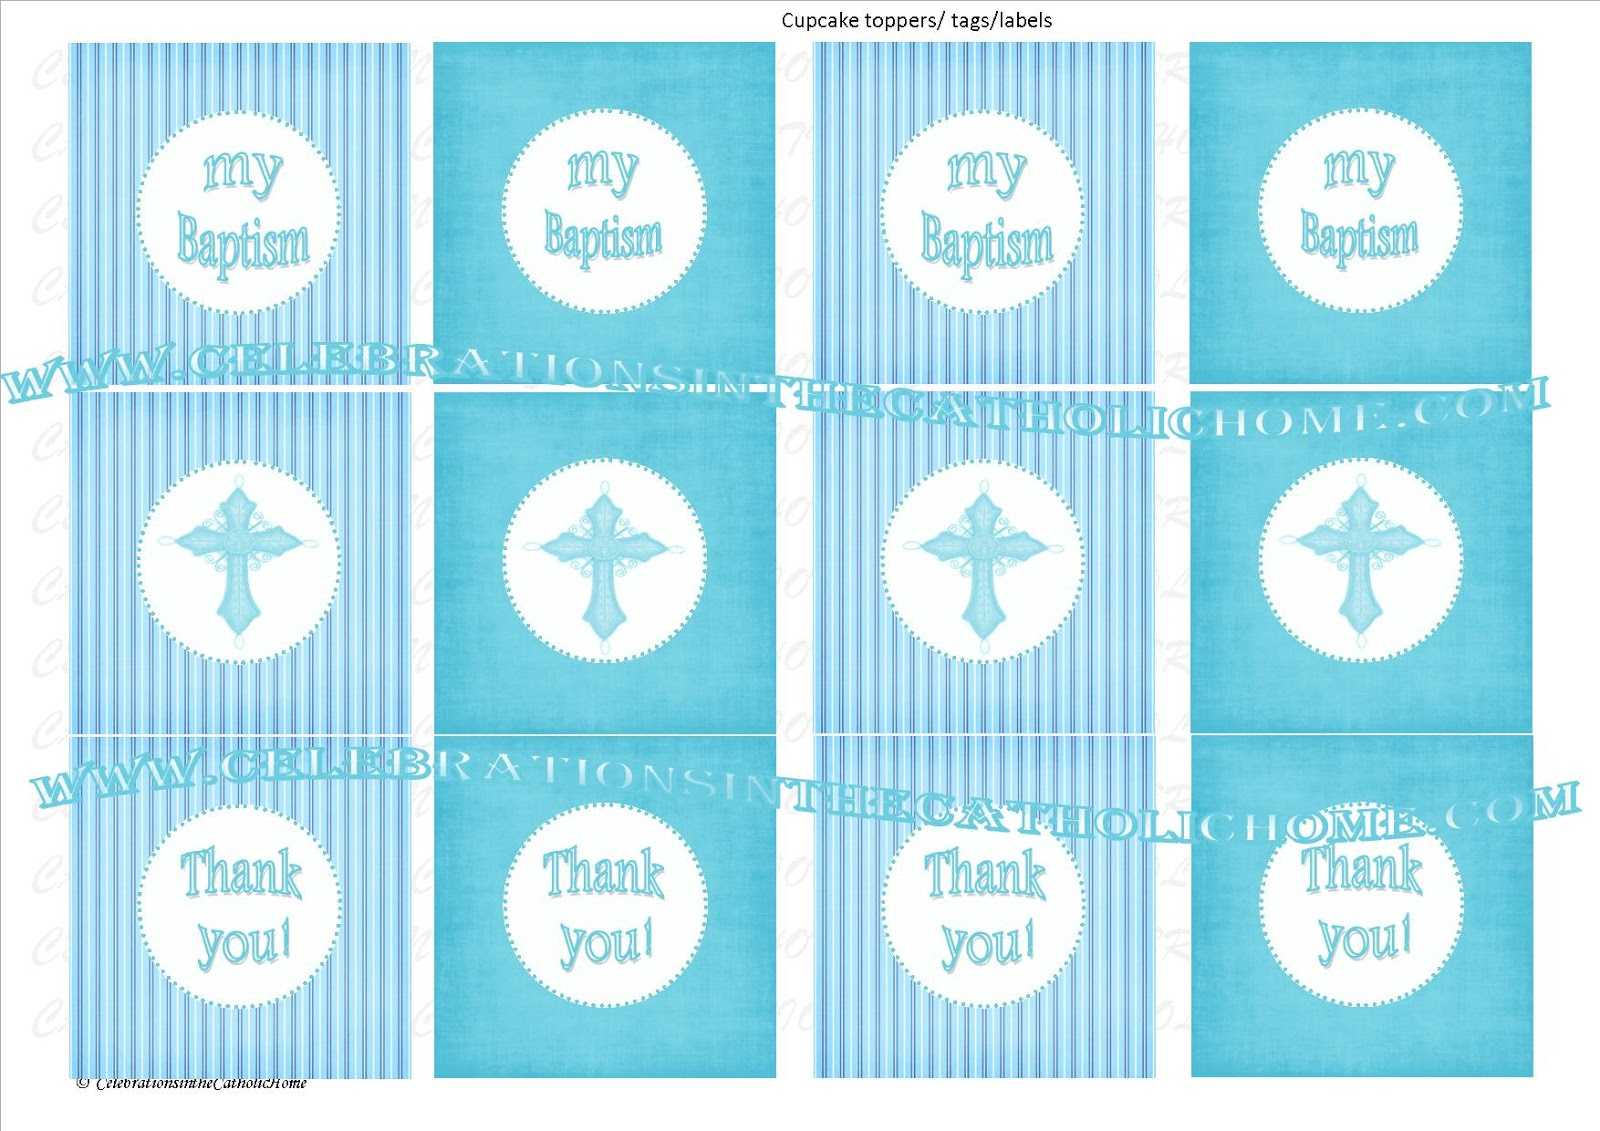 Christening Banner Template Free ] - Pics Photos Printable With Regard To Christening Banner Template Free